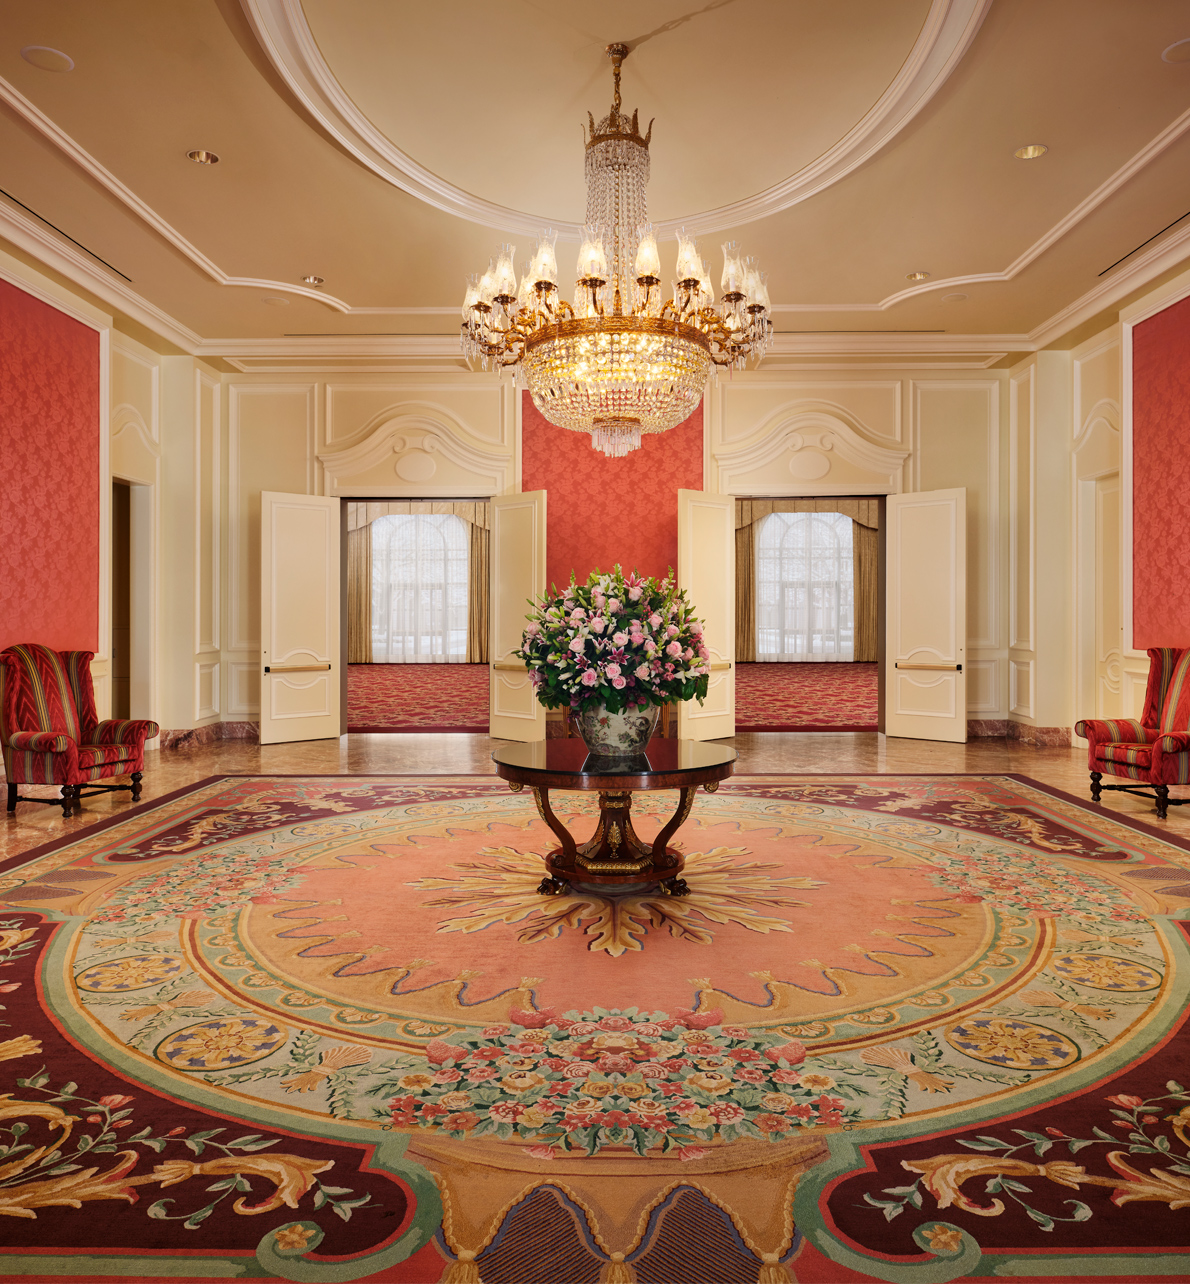 Reception area in the Grand Salon meeting space with hanging chandelier and center table with arrangement of flowers